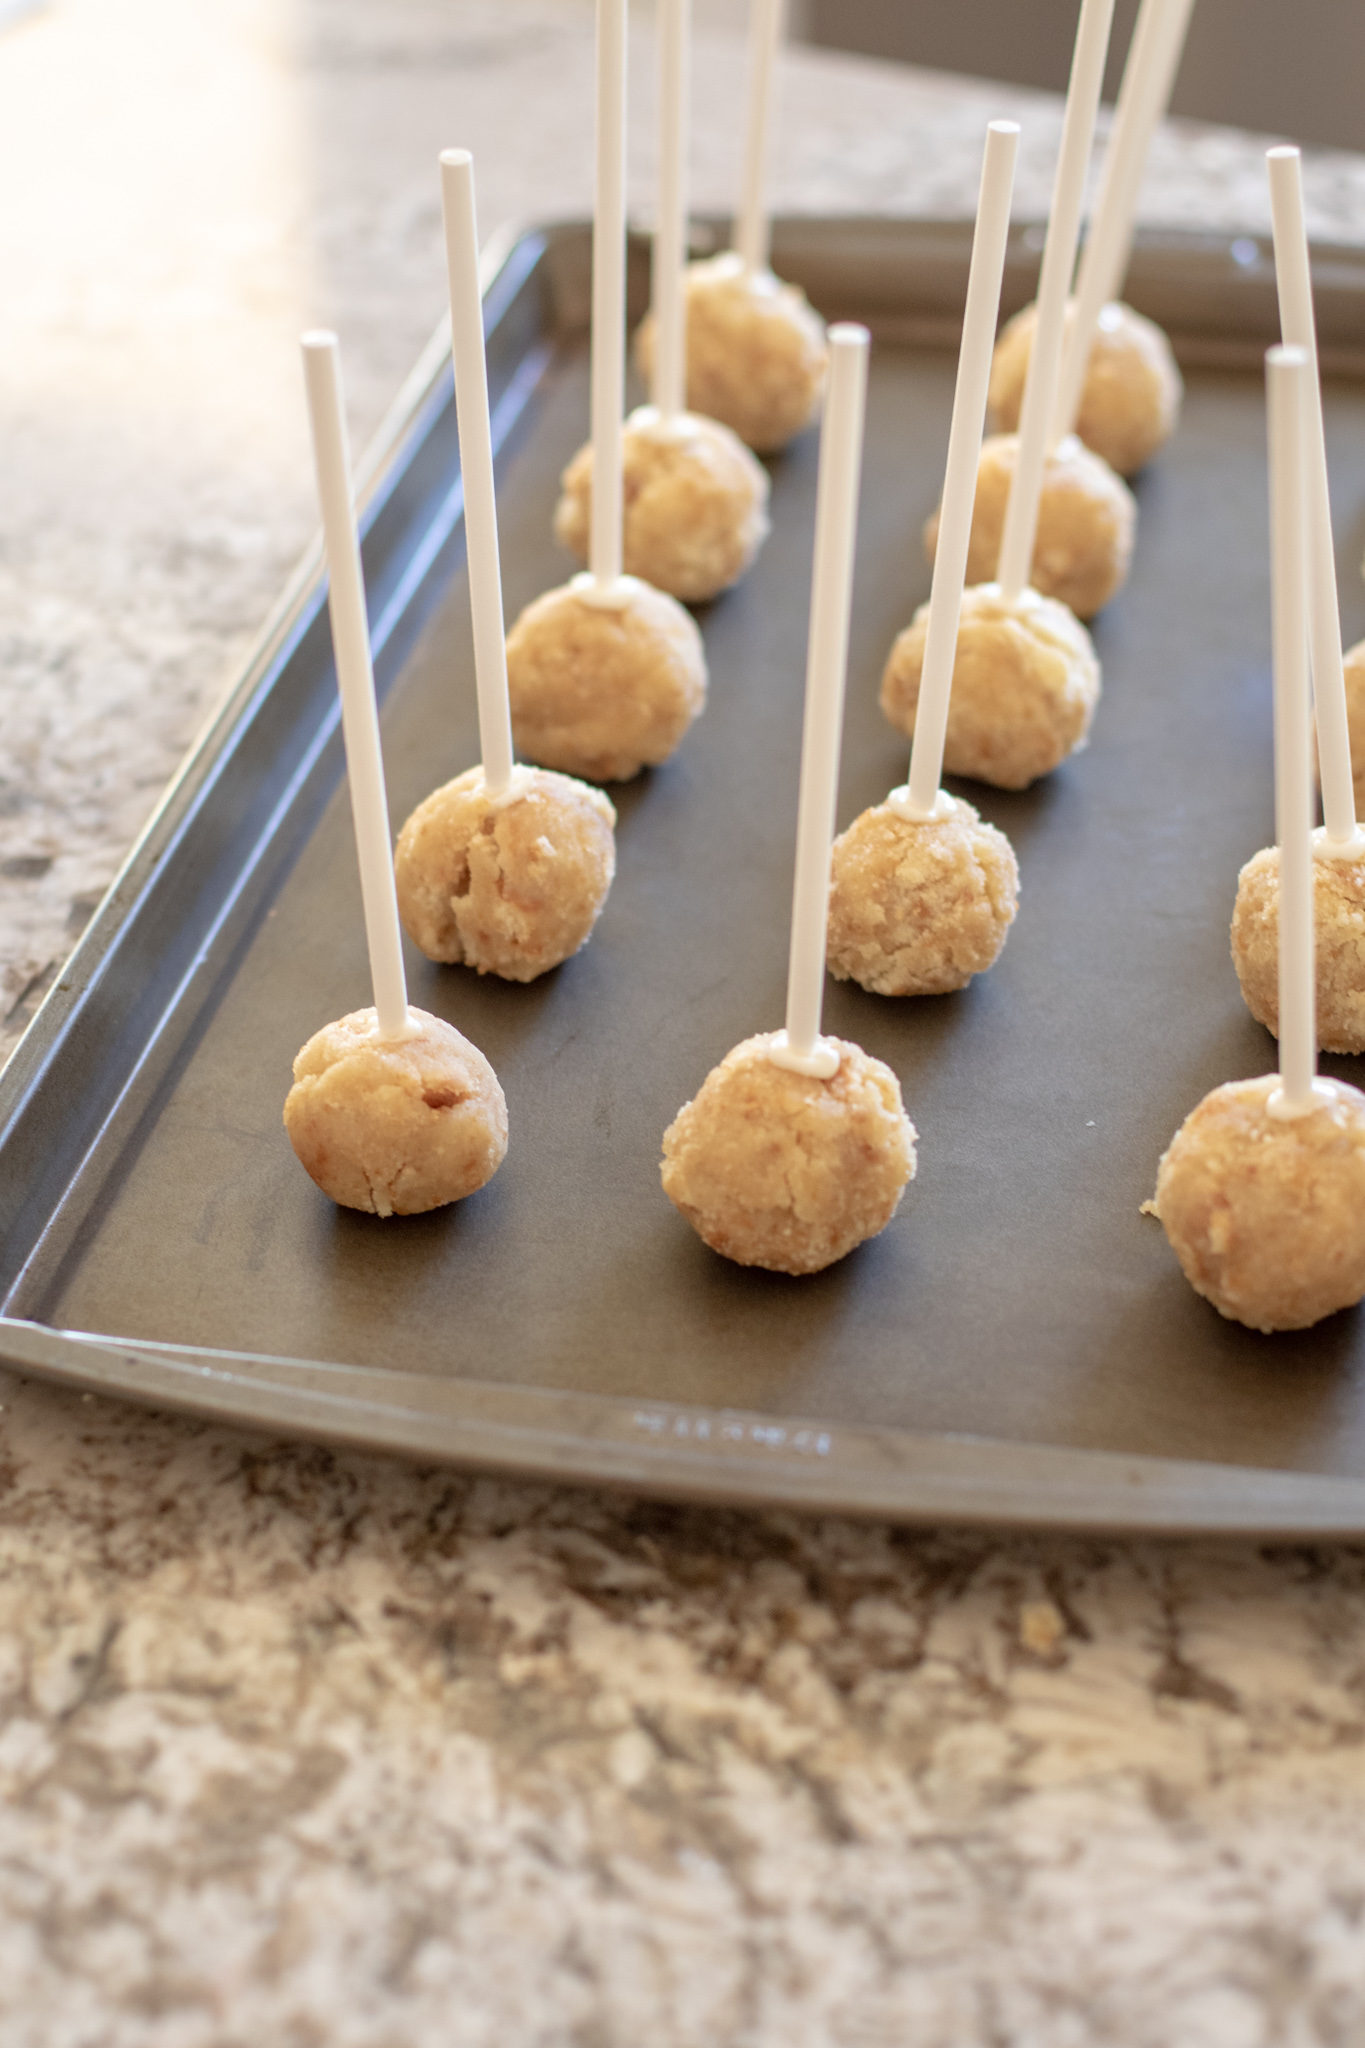 Cake rolled into balls on popsicle sticks sitting on a cookie sheet.